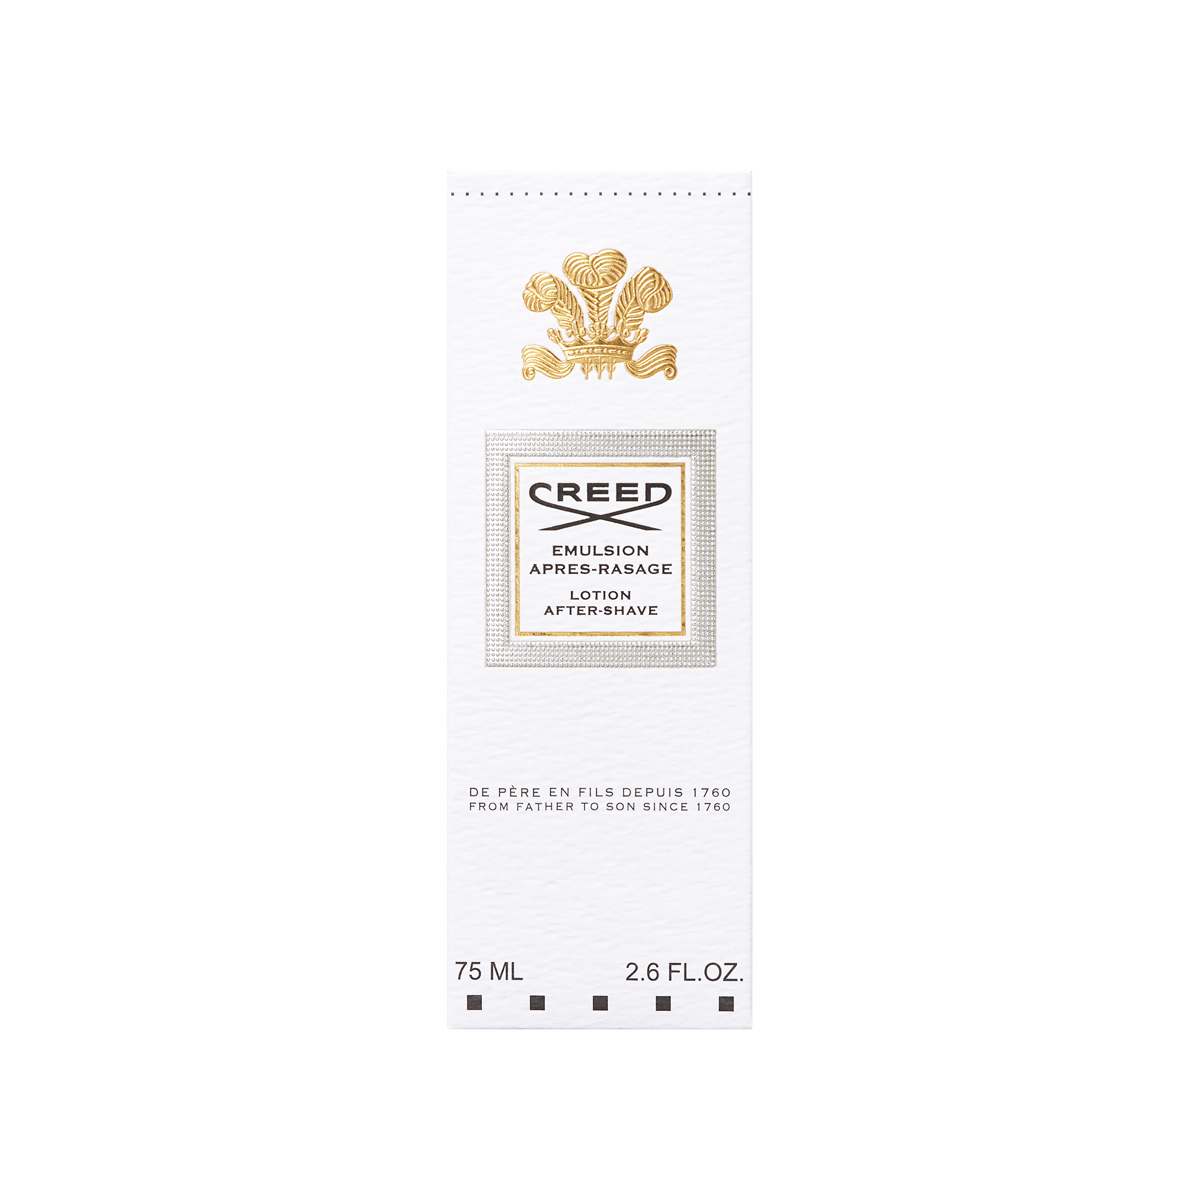 Creed - Silver Mountain After Shave Balsem